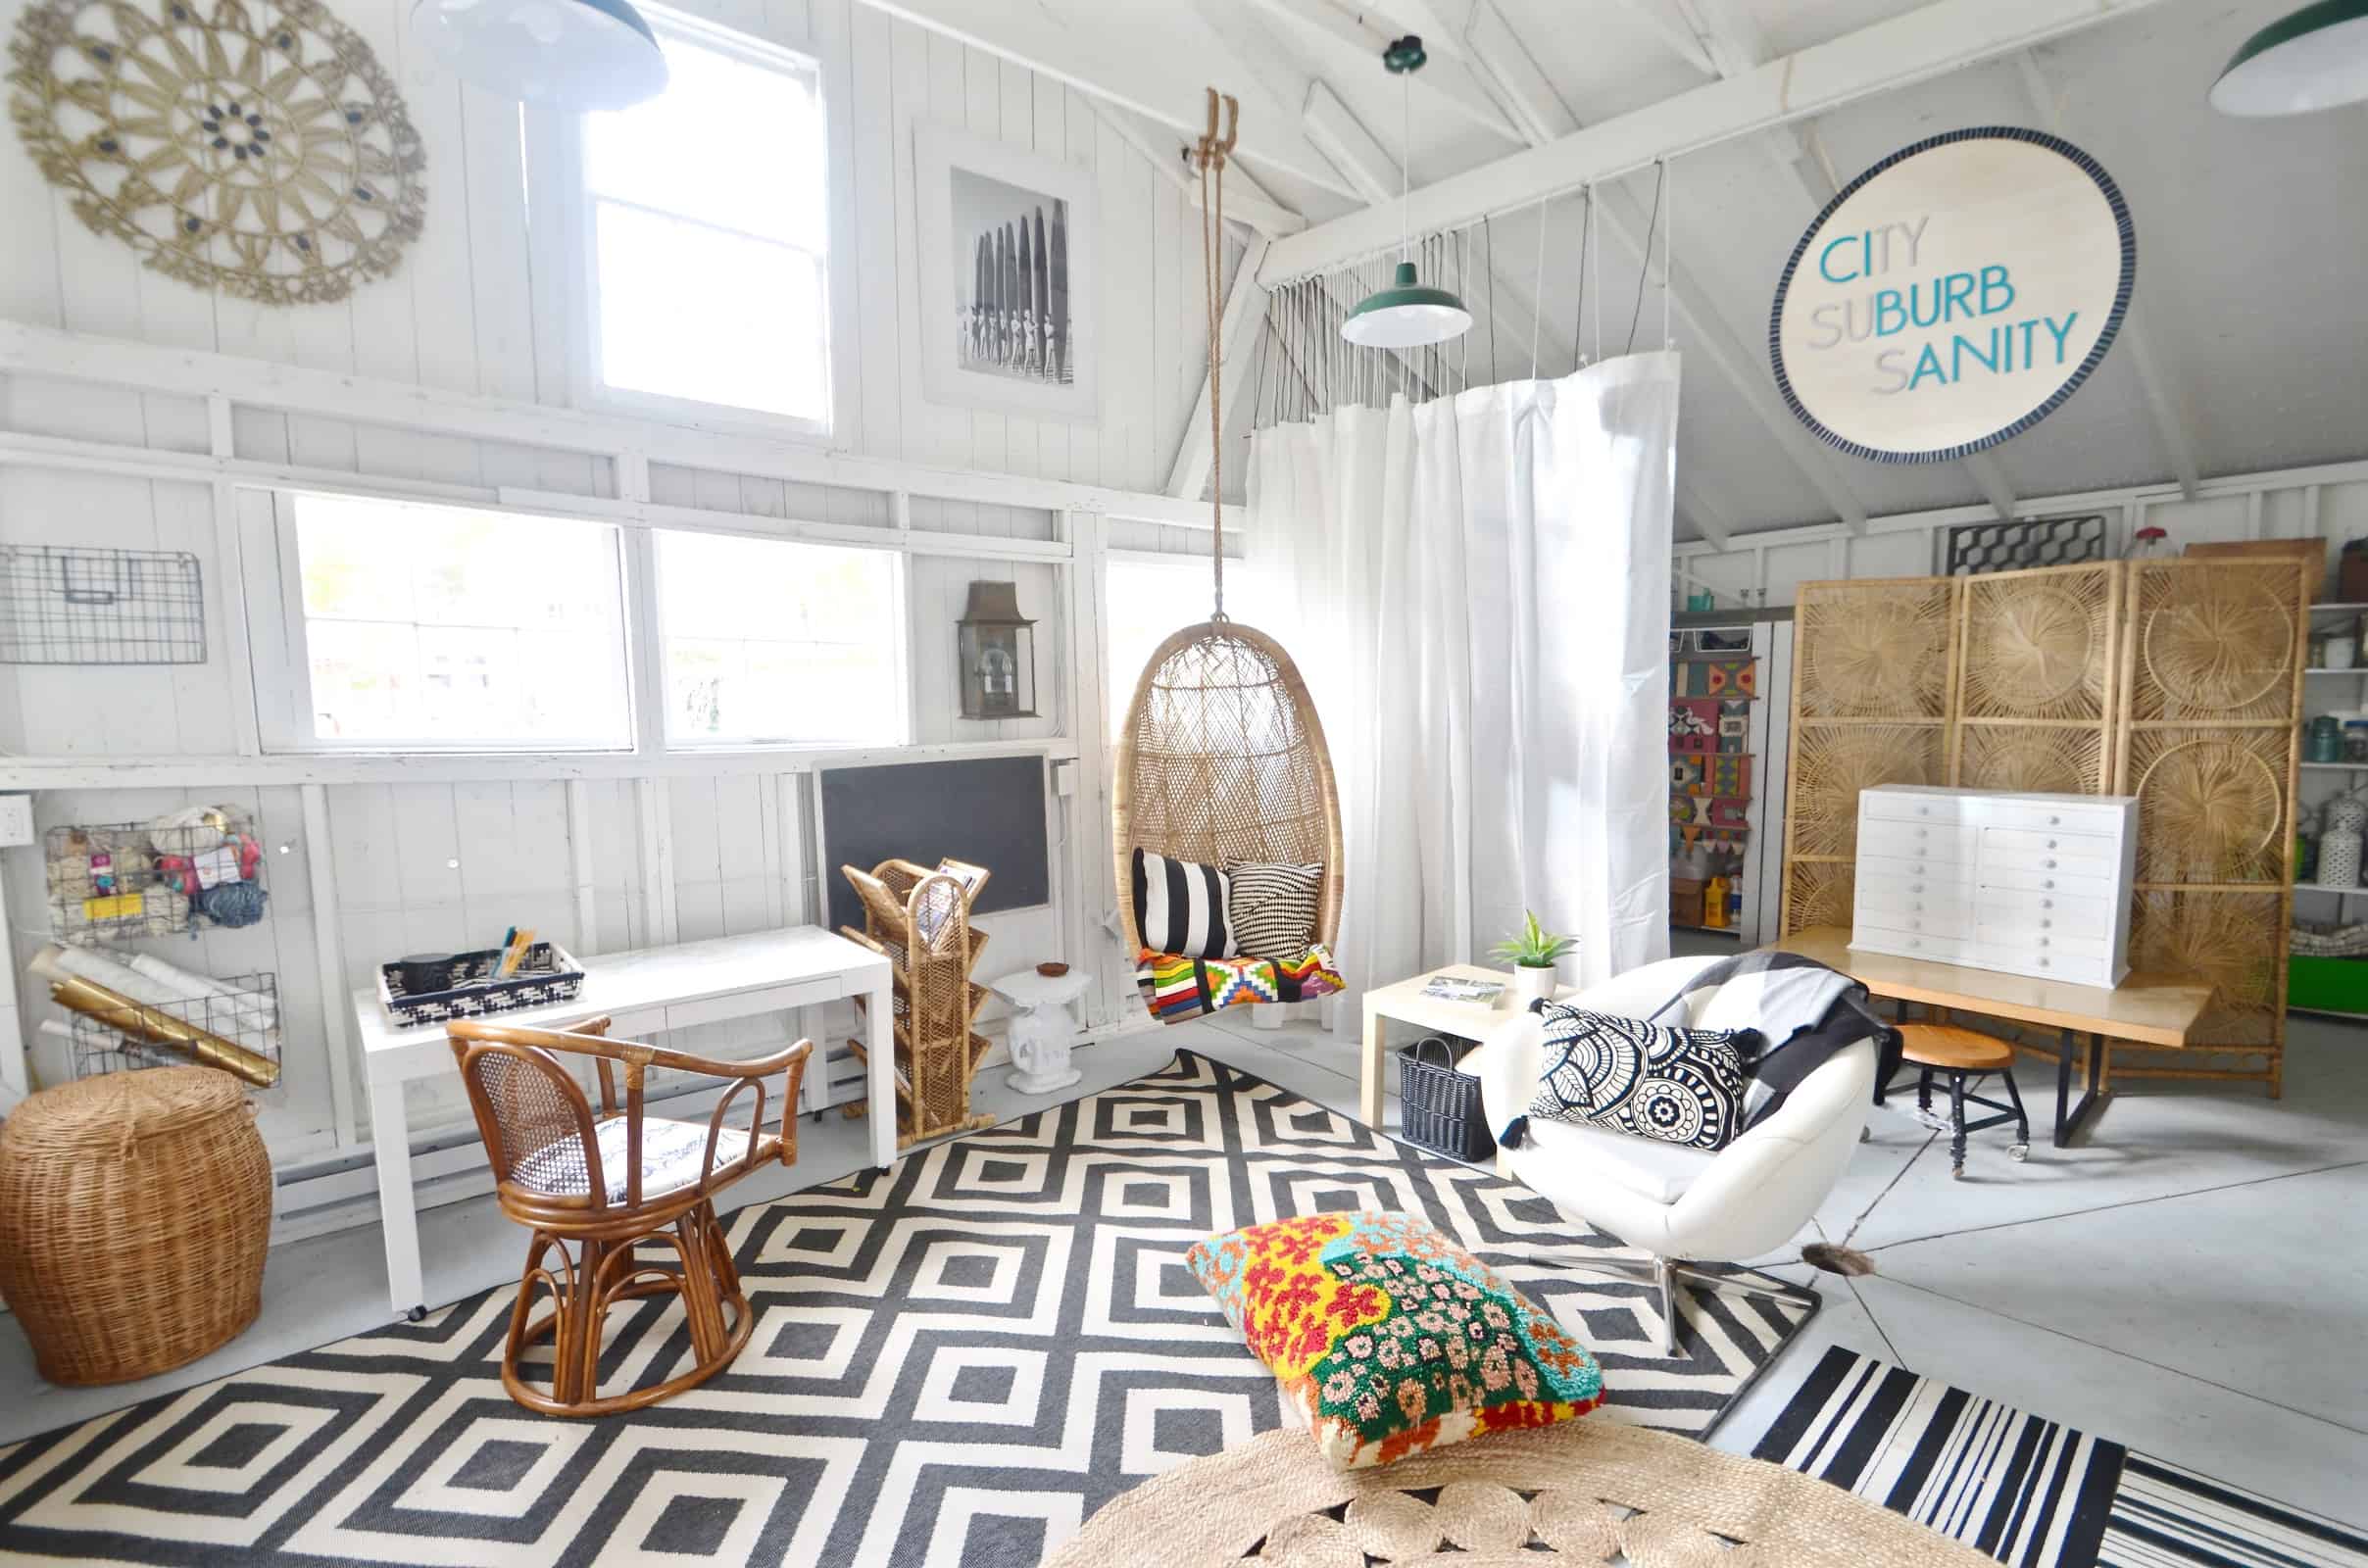 Backyard shed gets a colorful and eclectic multi-purpose makeover thanks to the One Room Challenge.